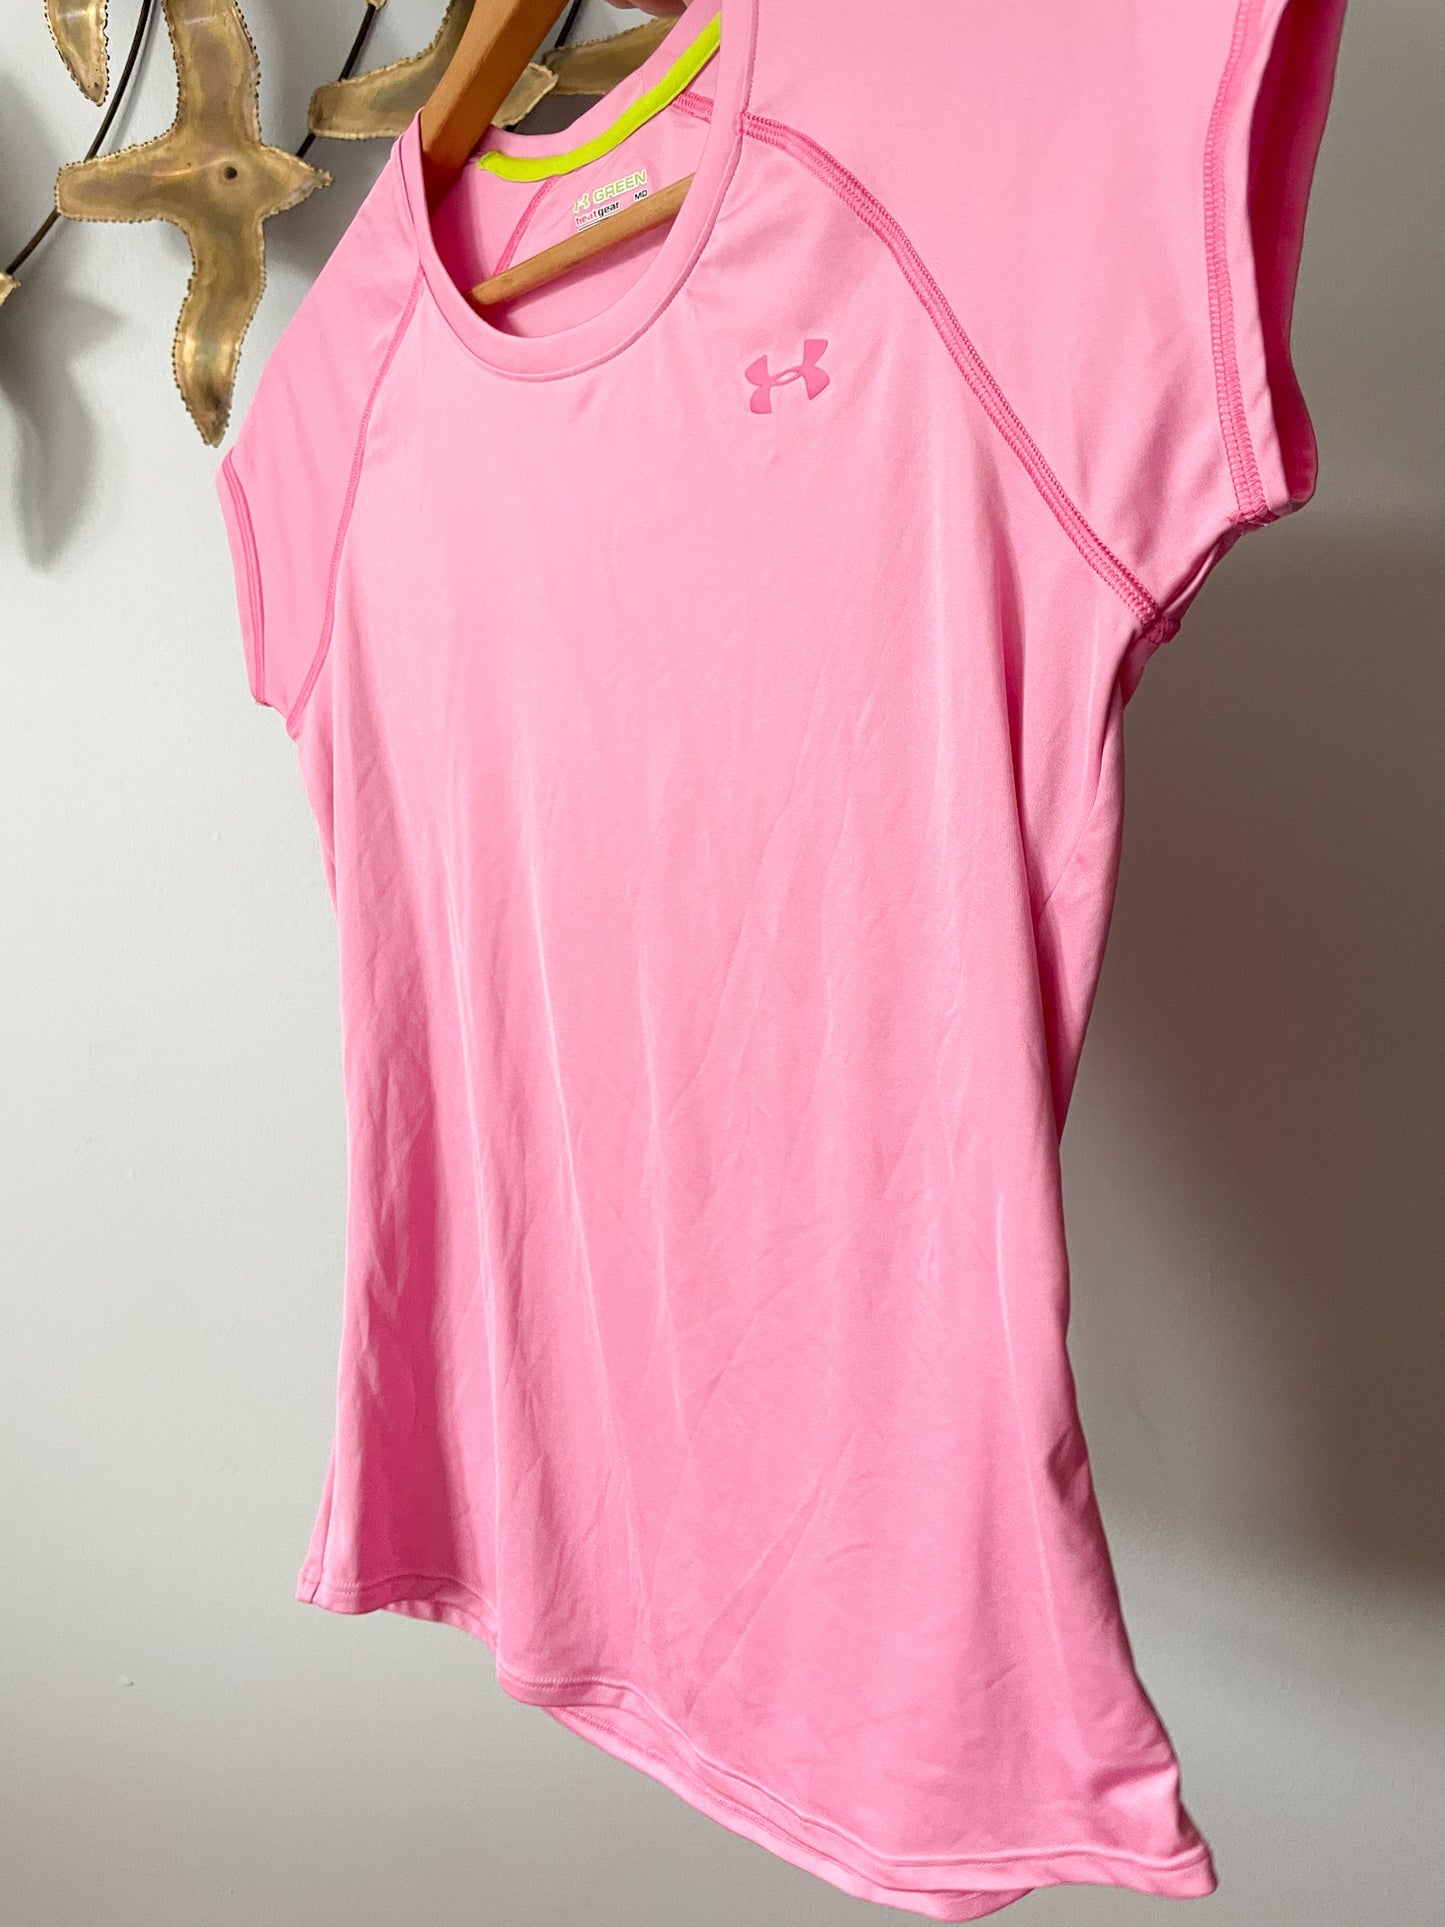 Under Armour Pink HeatGear Semi Fitted Workout Top - Small